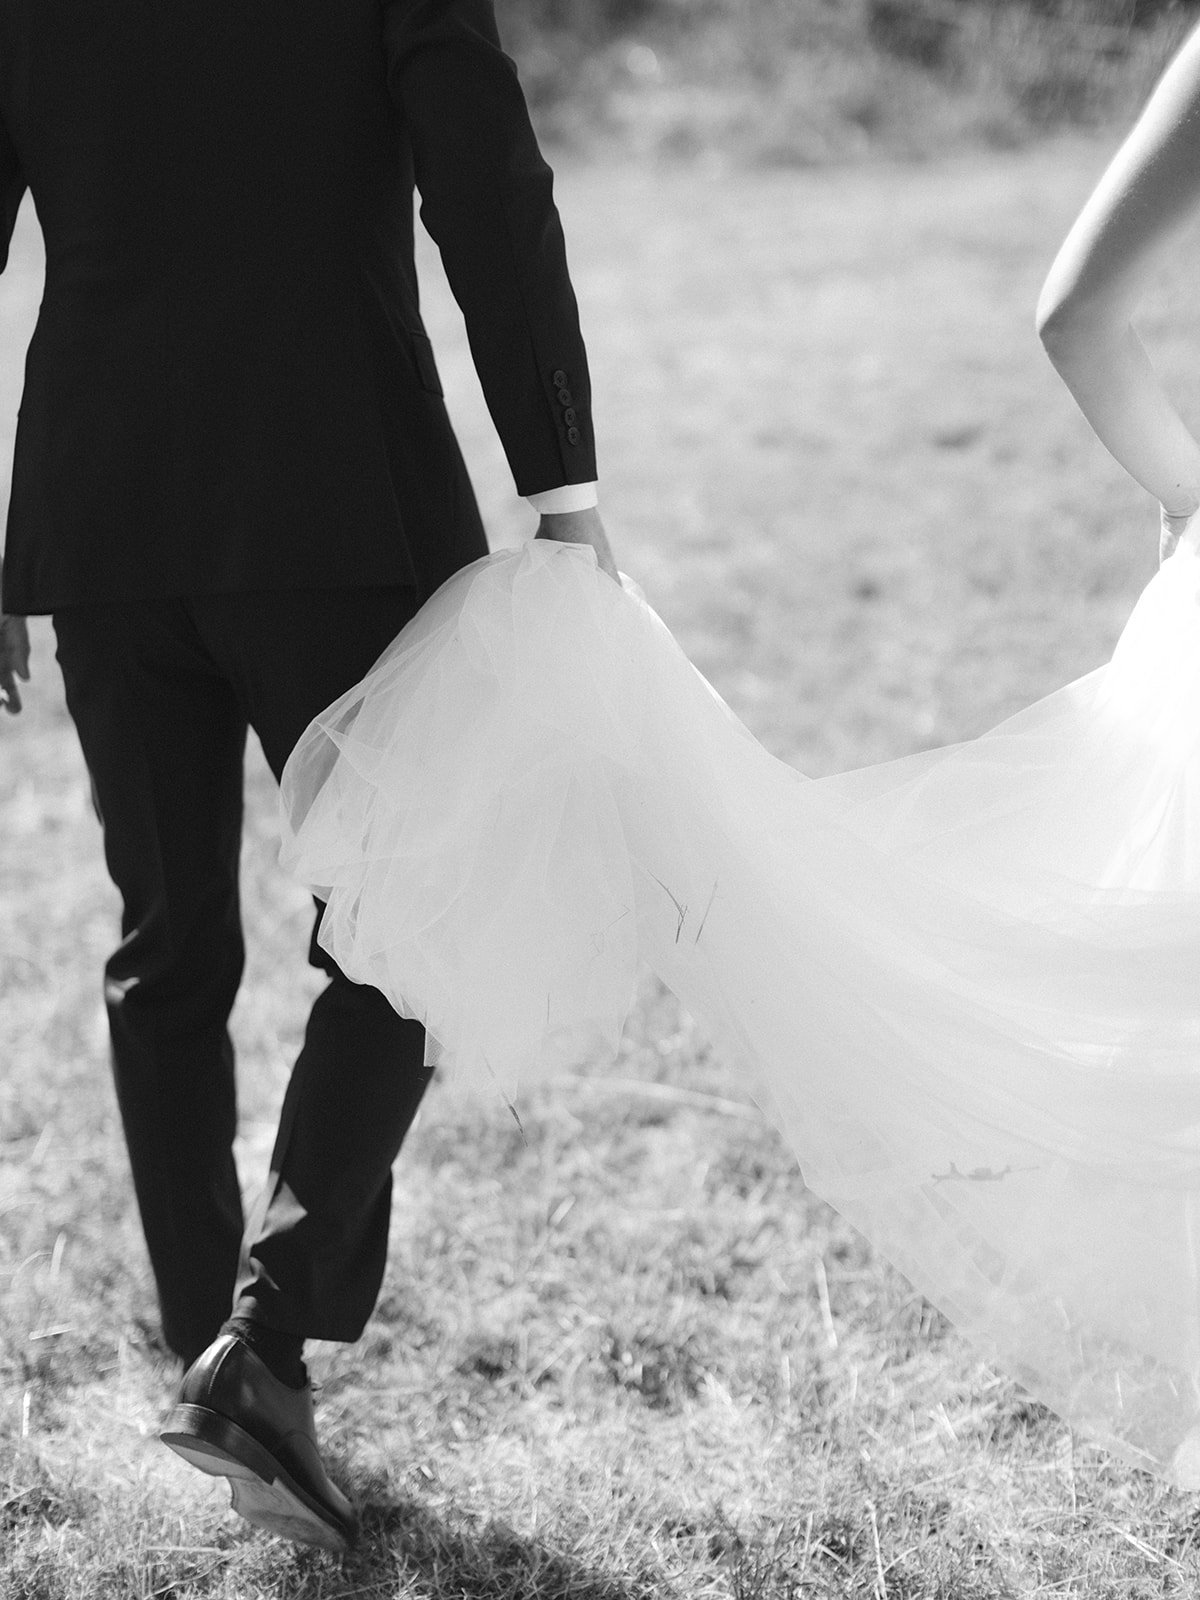 Groom holding bride's wedding dress in black and white